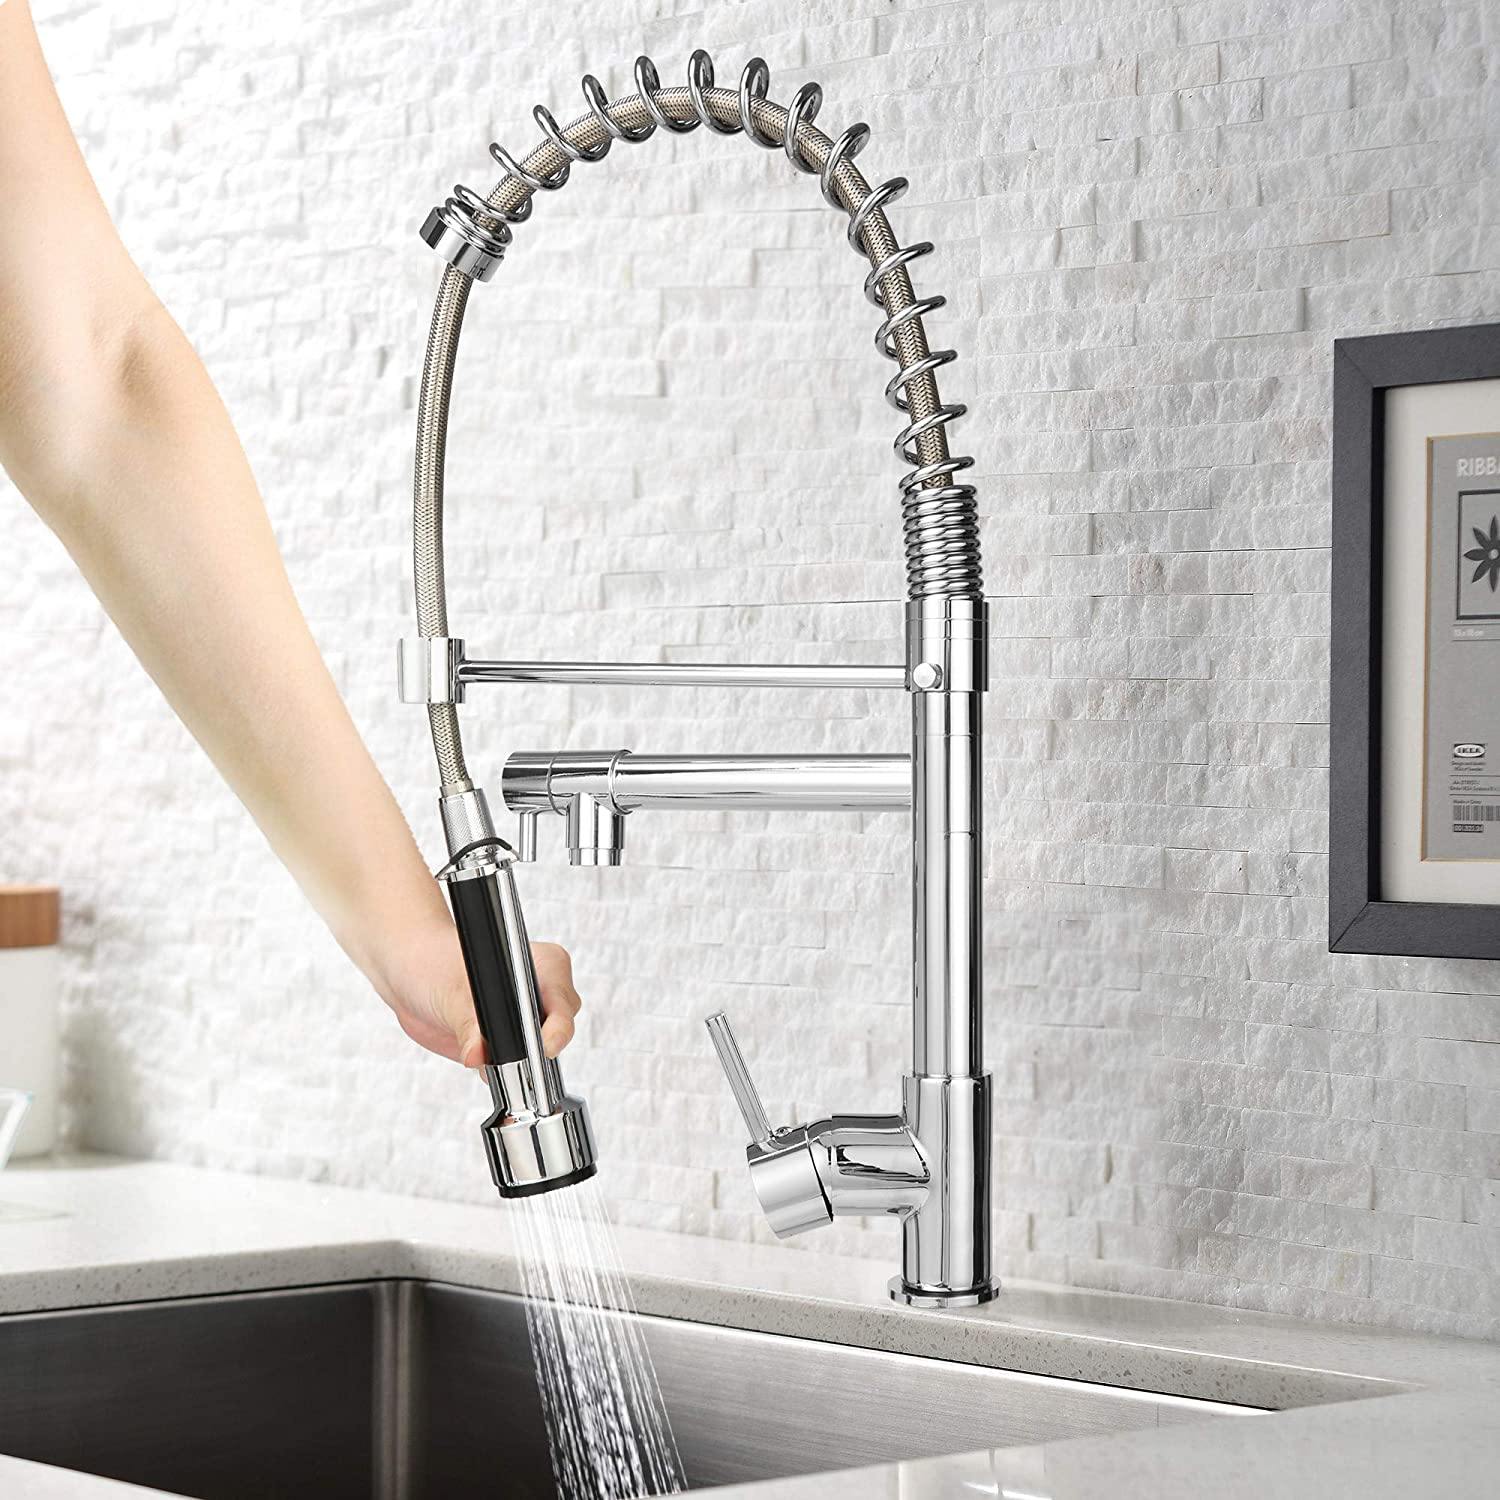 Single-Handle Pull-Down Sprayer Kitchen Faucet, High Arc Stainless Steel, 360 Swivel Single Handle Single Hole Spring Sink Faucet, Chrome - Bosonshop